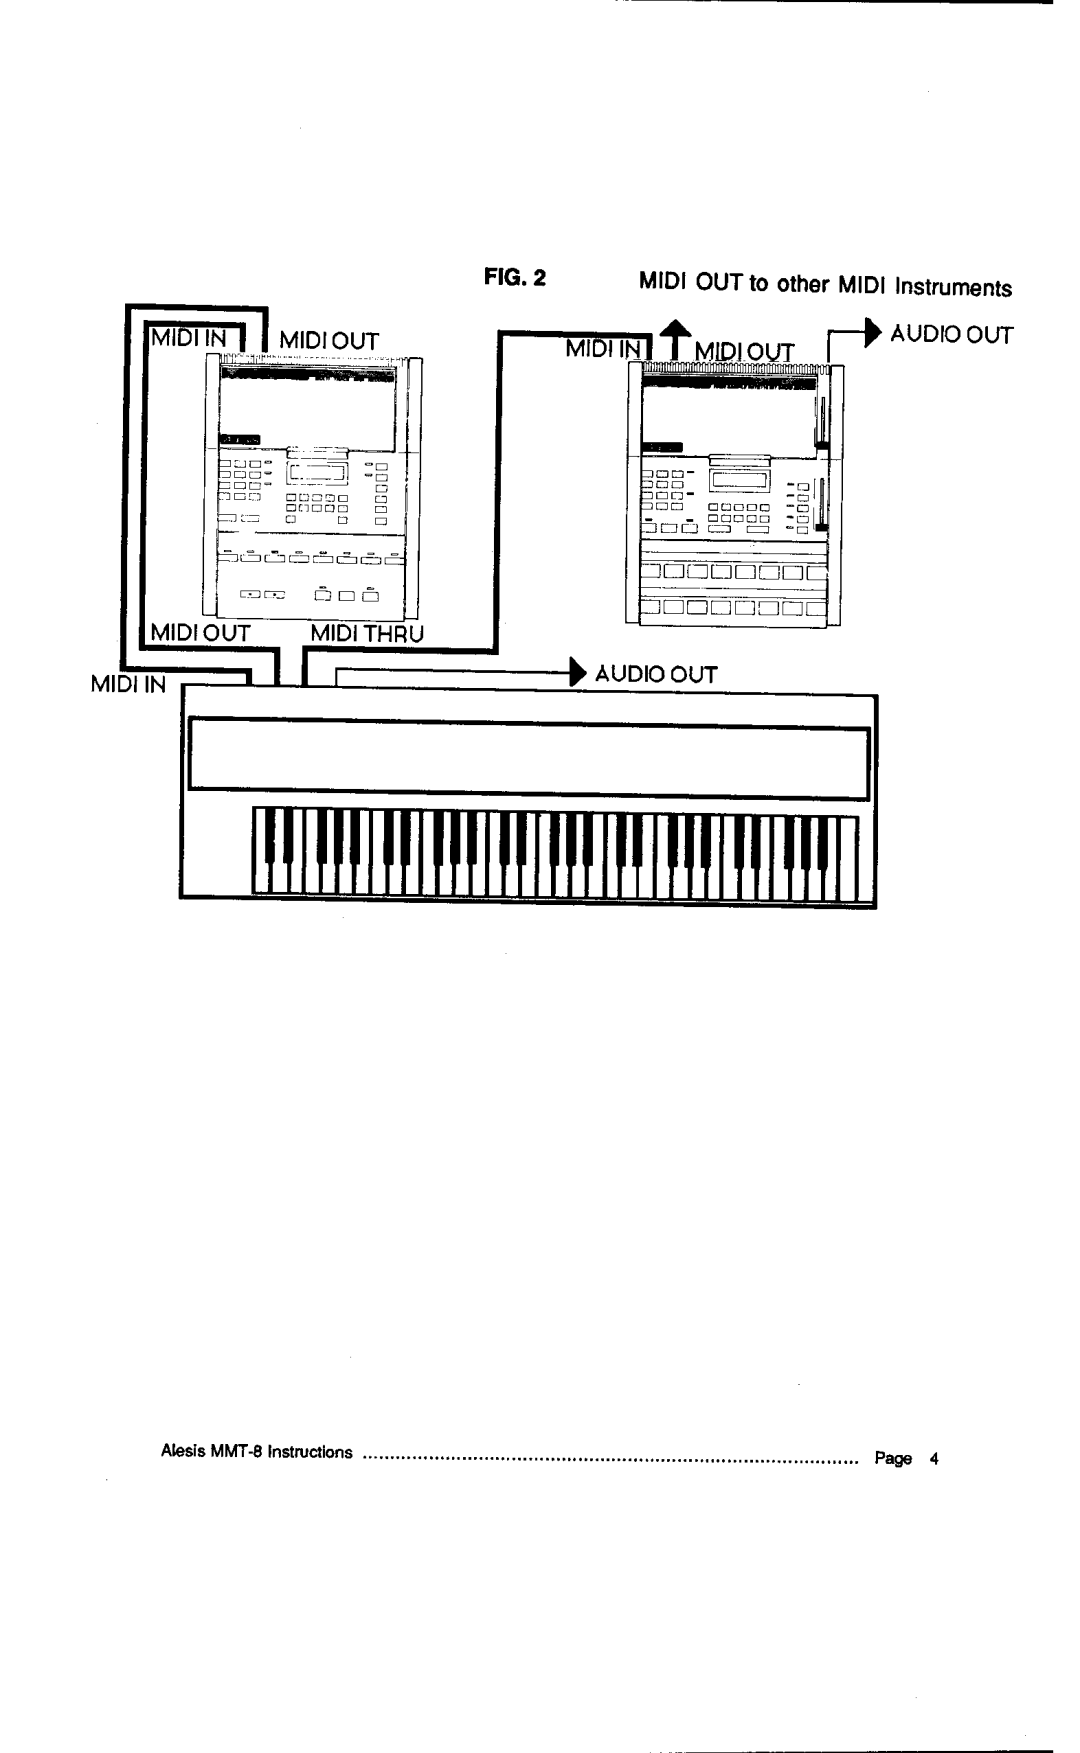 Alesis HR-16:B instruction manual MlDlOUTto otherMlDlInstruments AUDIOOUT, Audioout, Al€sisMMT-8Instructlons, page 